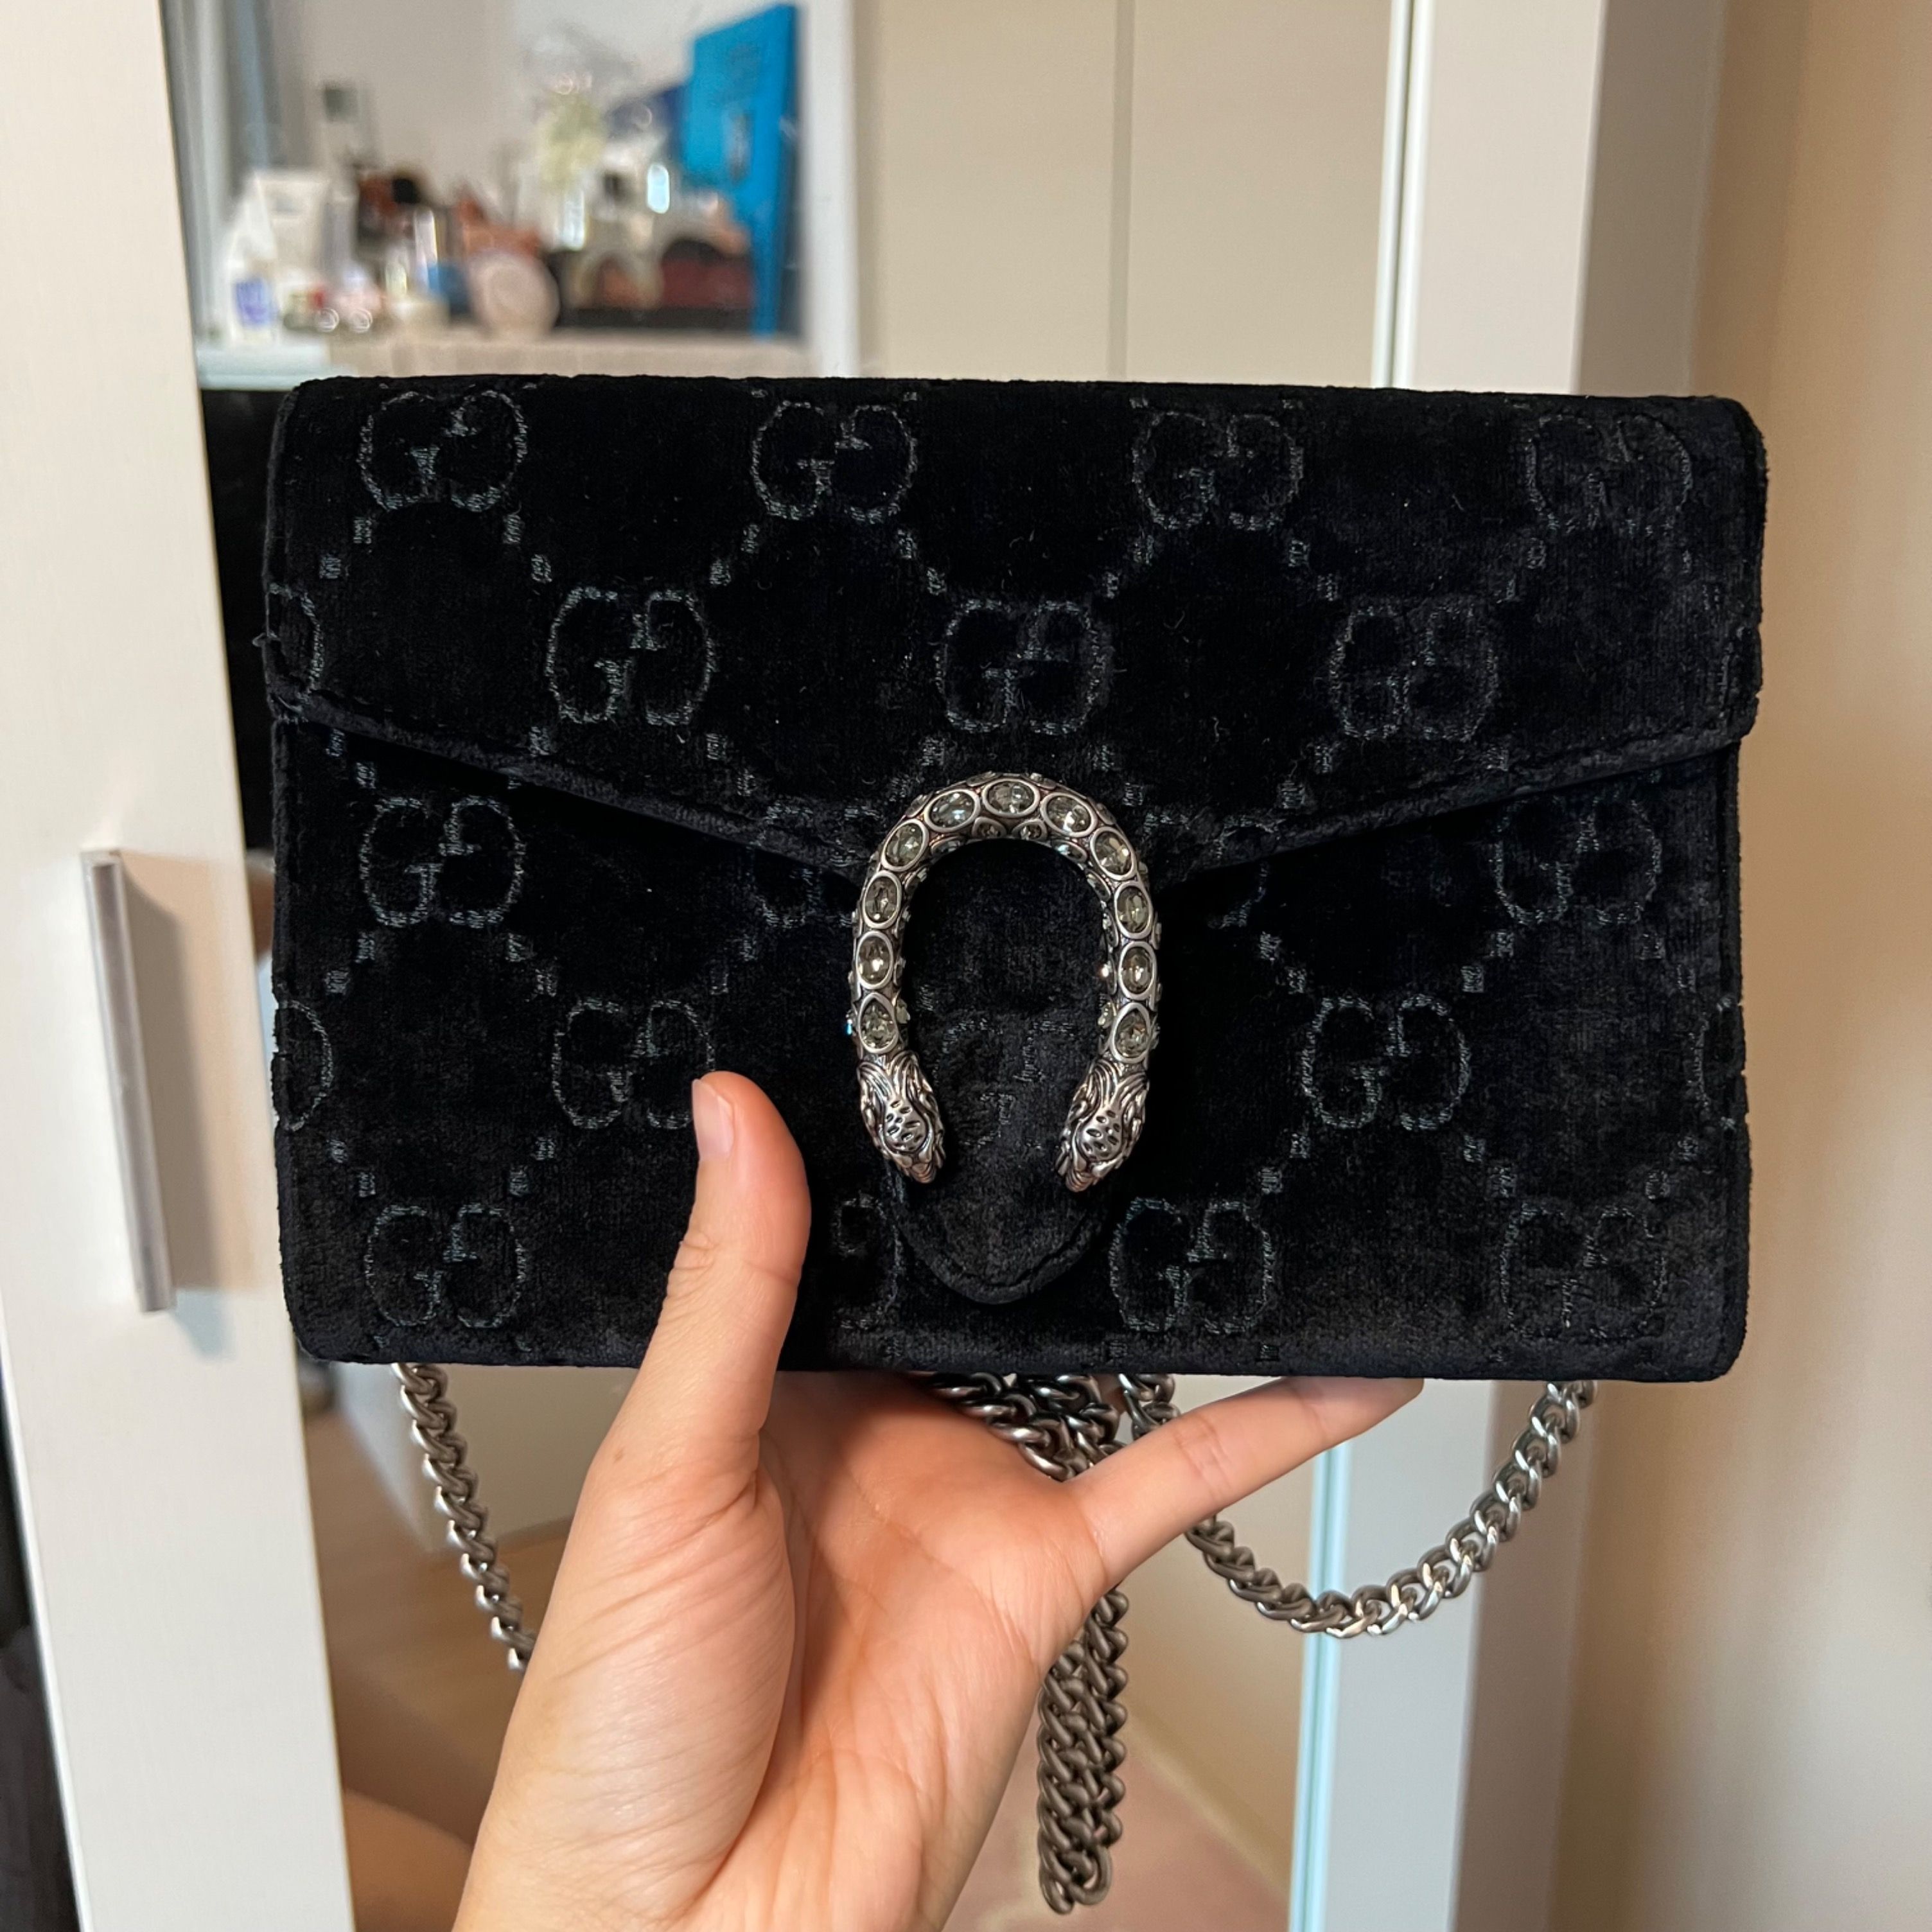 Gucci Dionysus WOC Review, 3-month wear and tear 